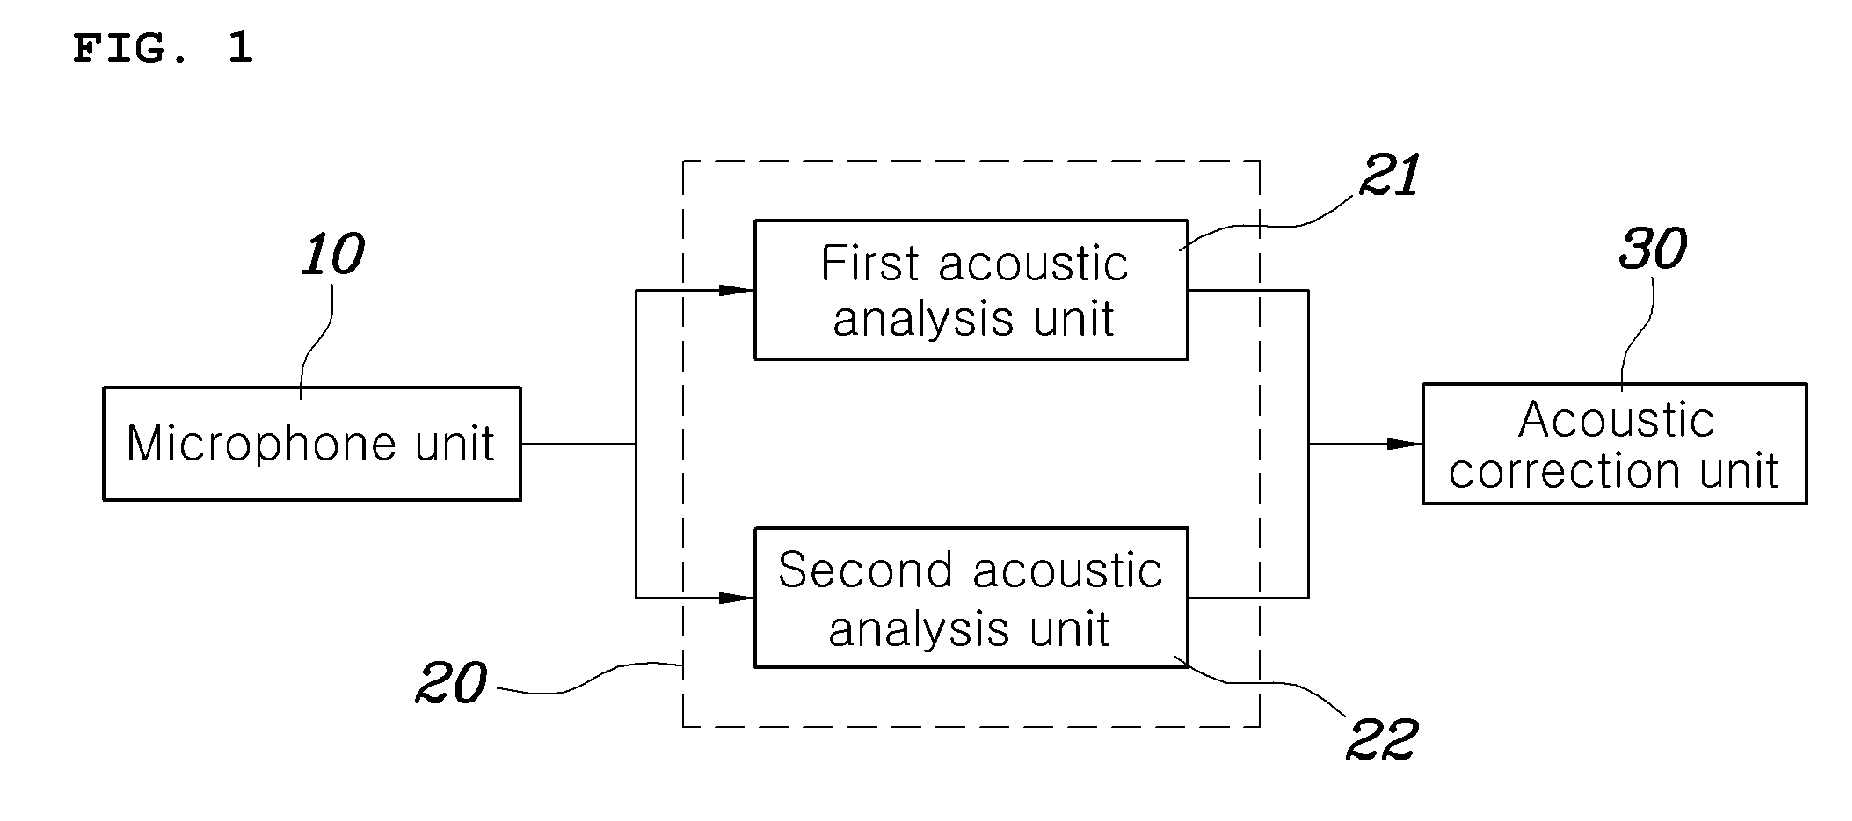 Acoustic correction apparatus and method for vehicle audio system